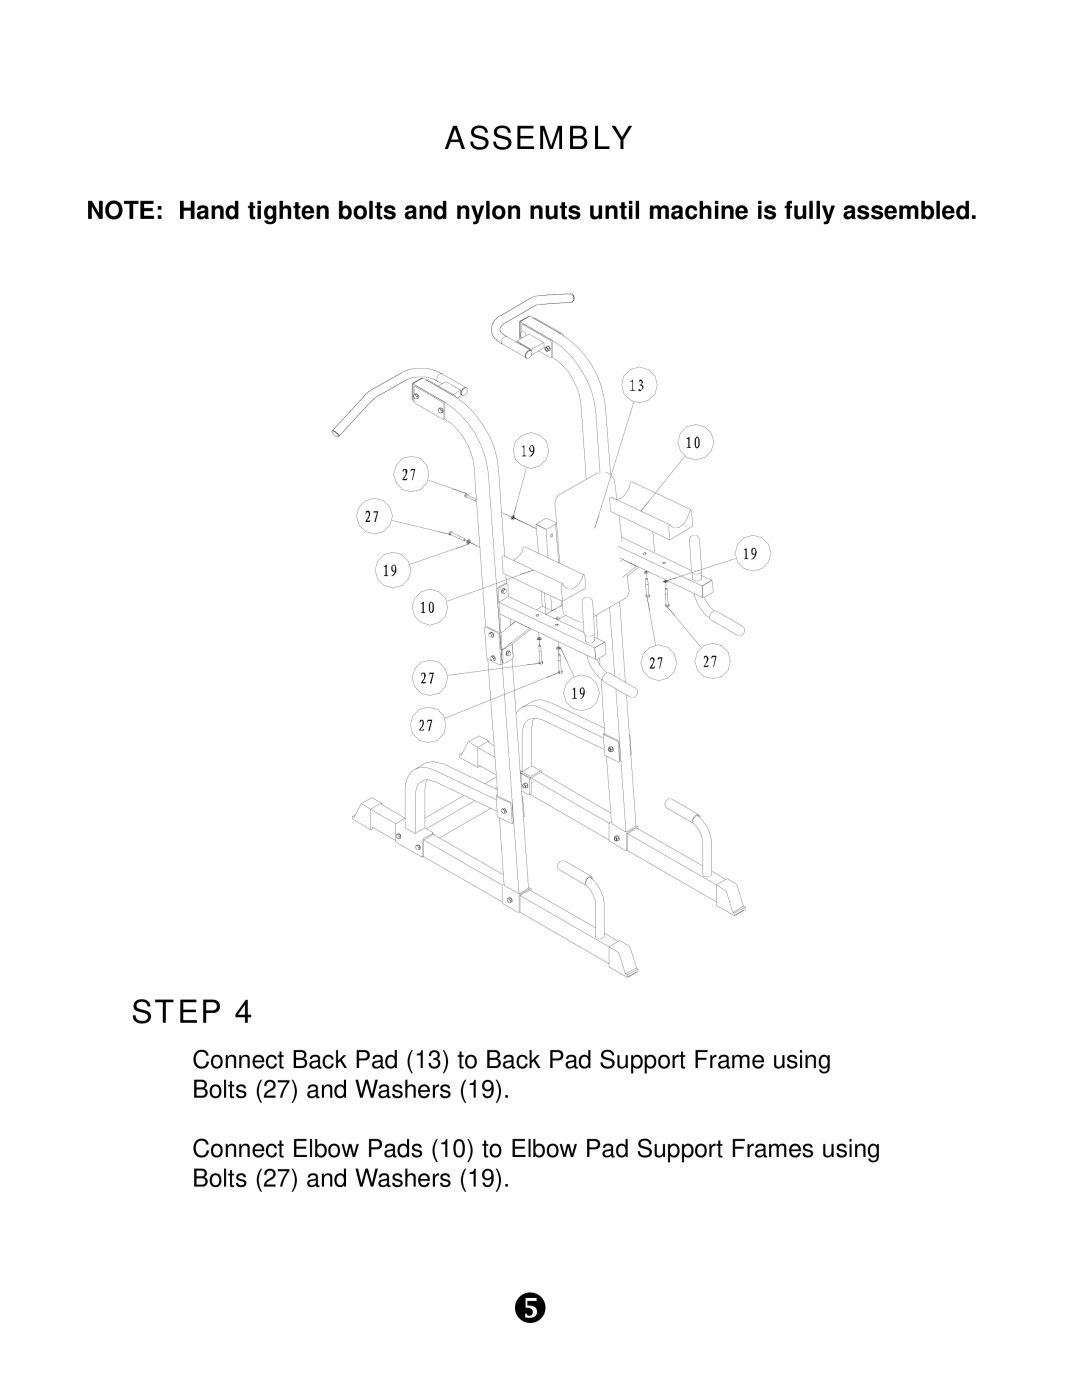 Keys Fitness KPS-PT manual Assembly, Step, Connect Back Pad 13 to Back Pad Support Frame using, Bolts 27 and Washers 